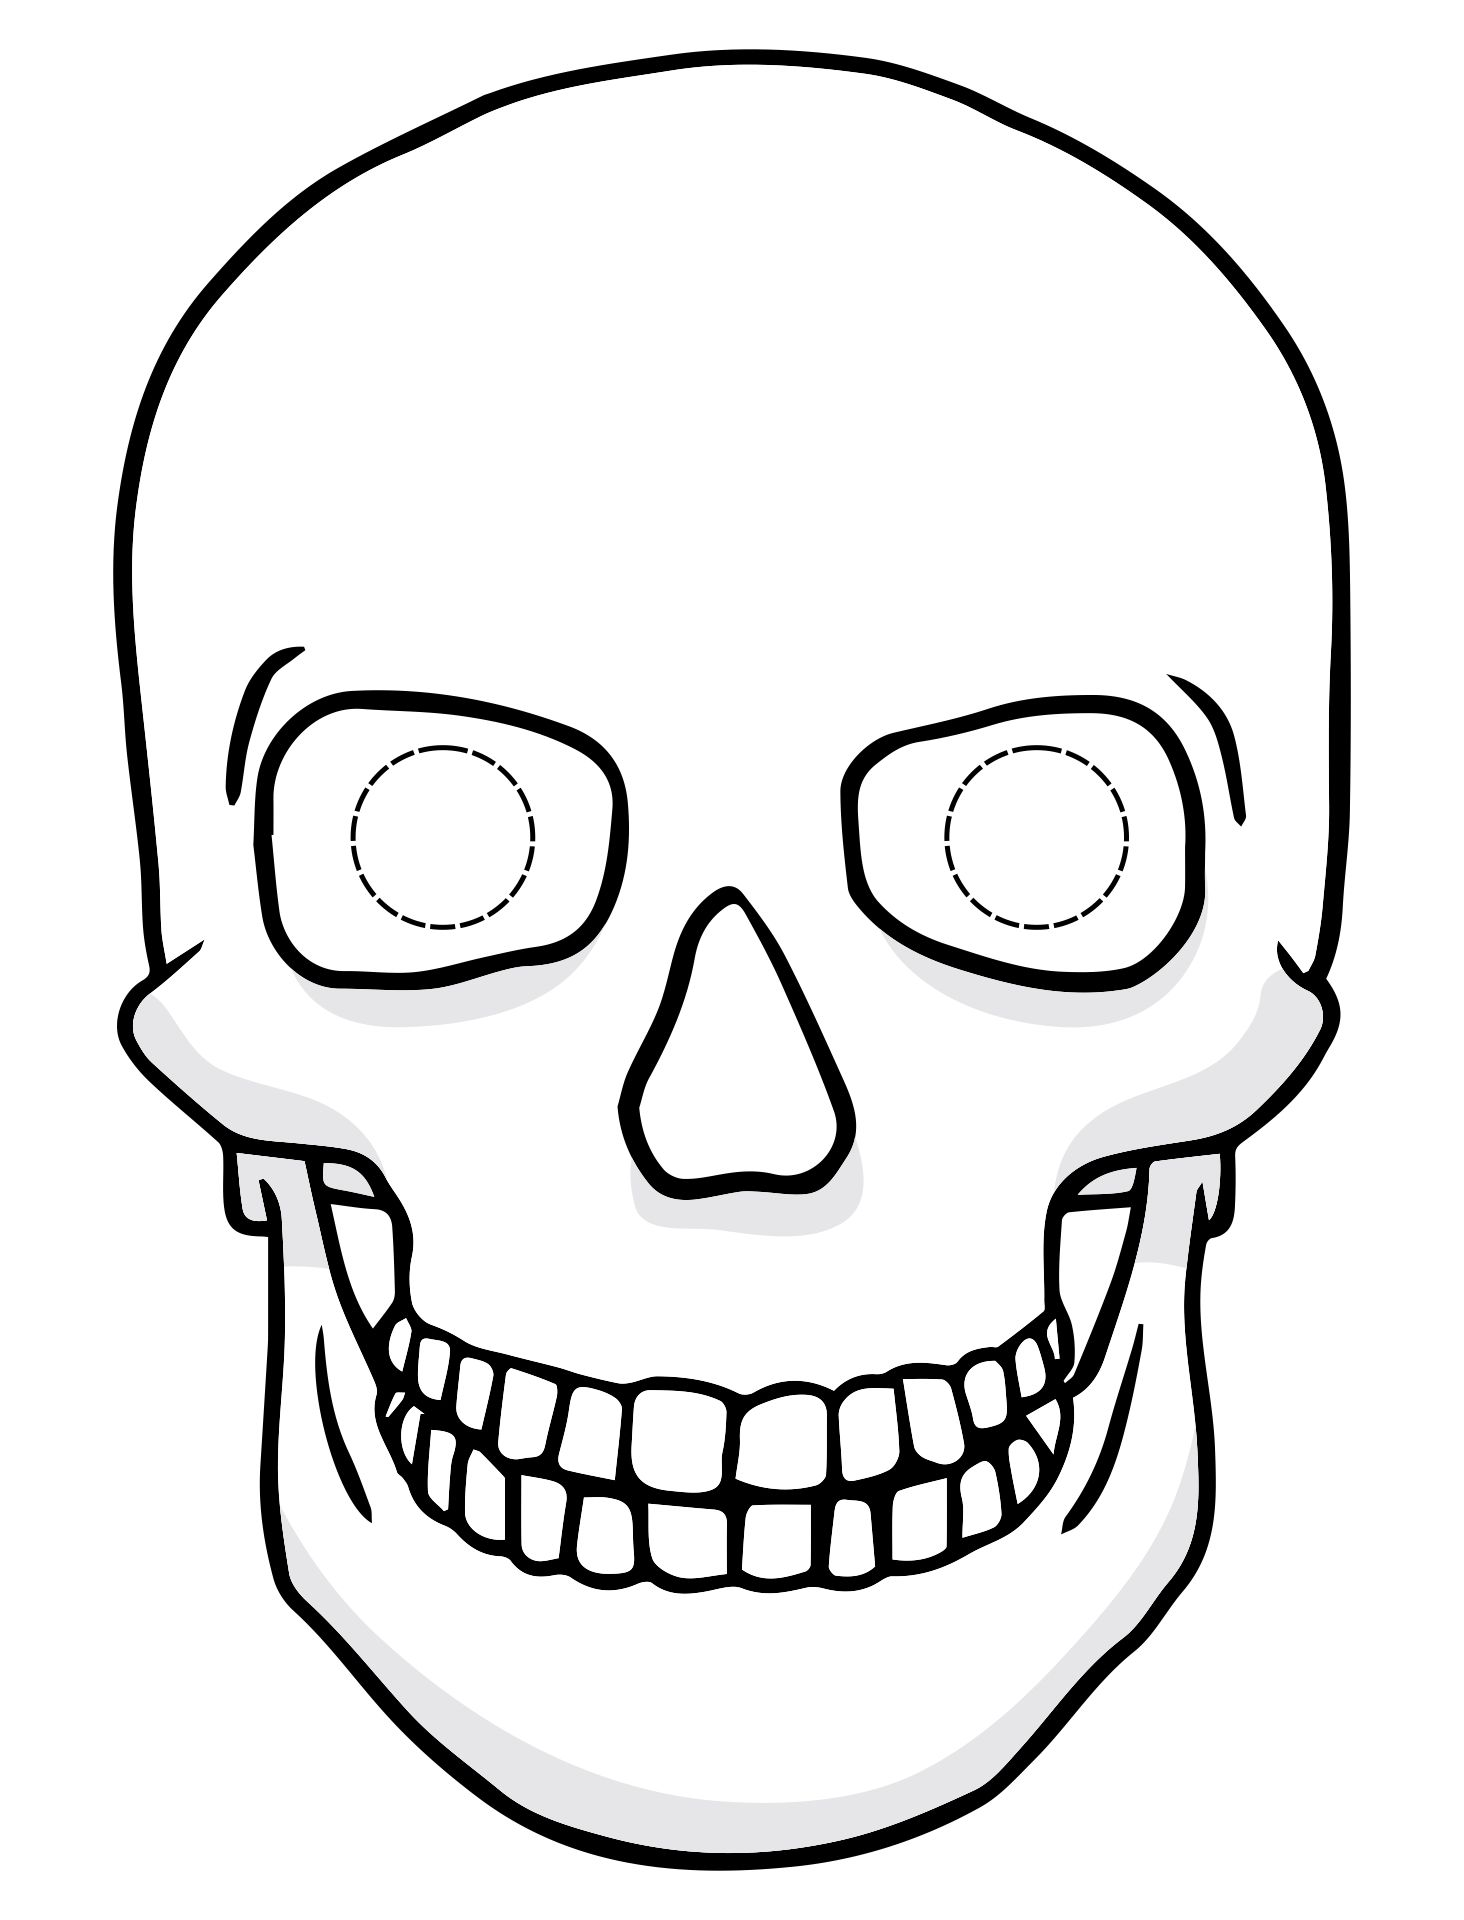 15 Best Scary Halloween Mask Templates Printable PDF for Free at Printablee